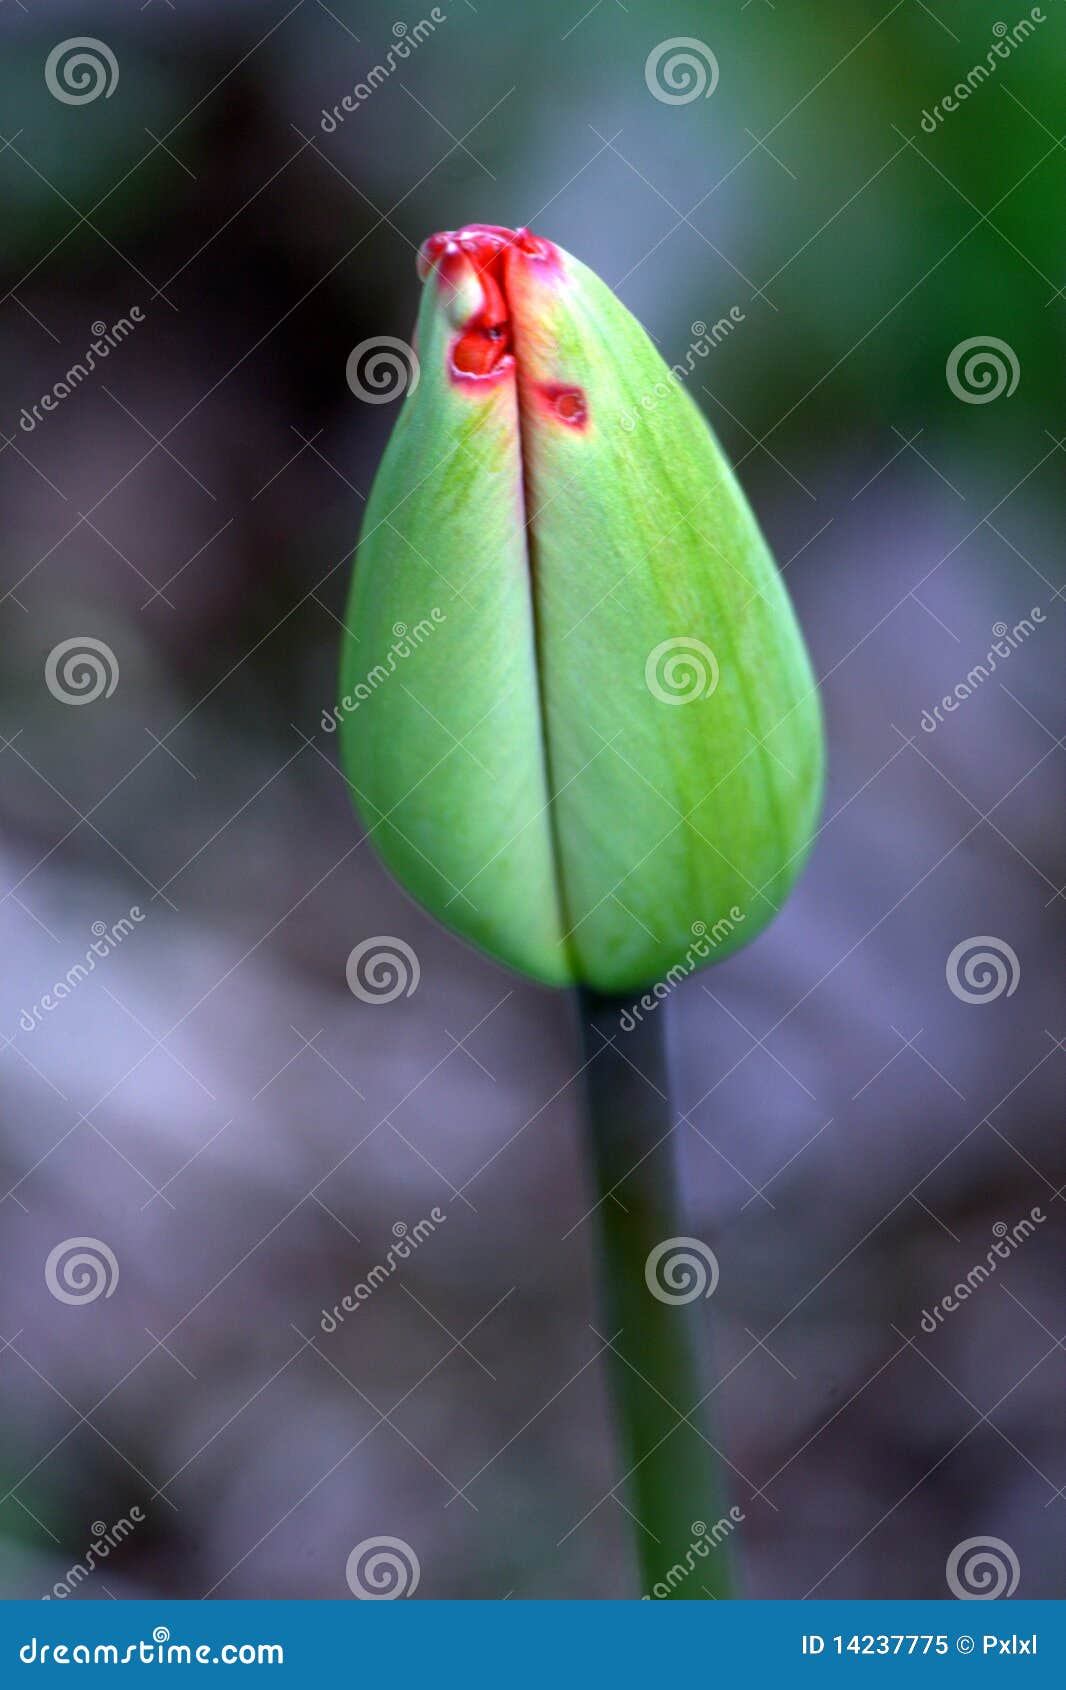 Young tulip stock image. Image of greenery, bright, growth - 14237775